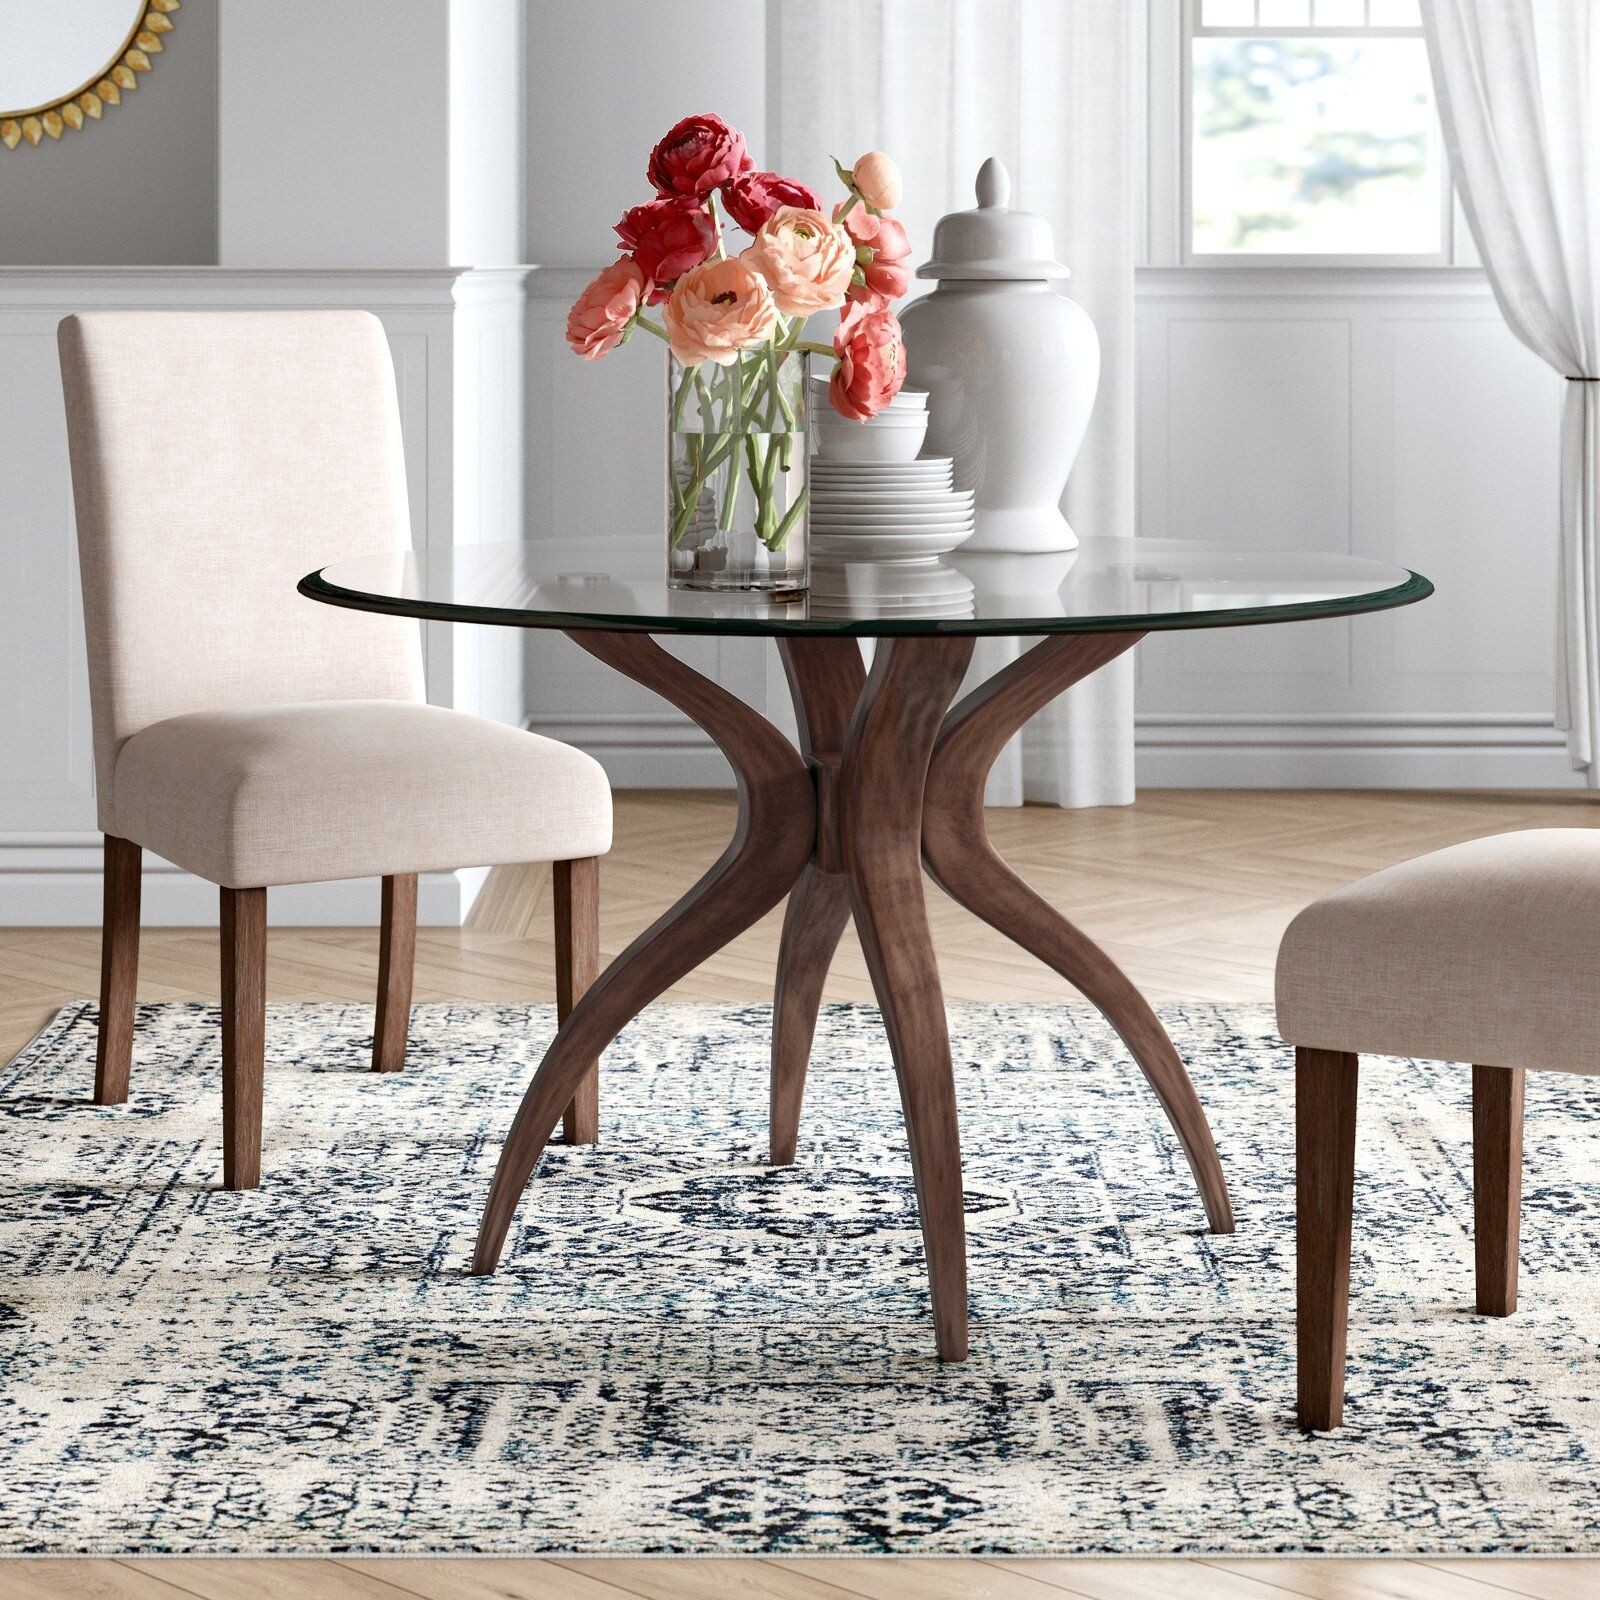 Elderton dining table glass top dining table round